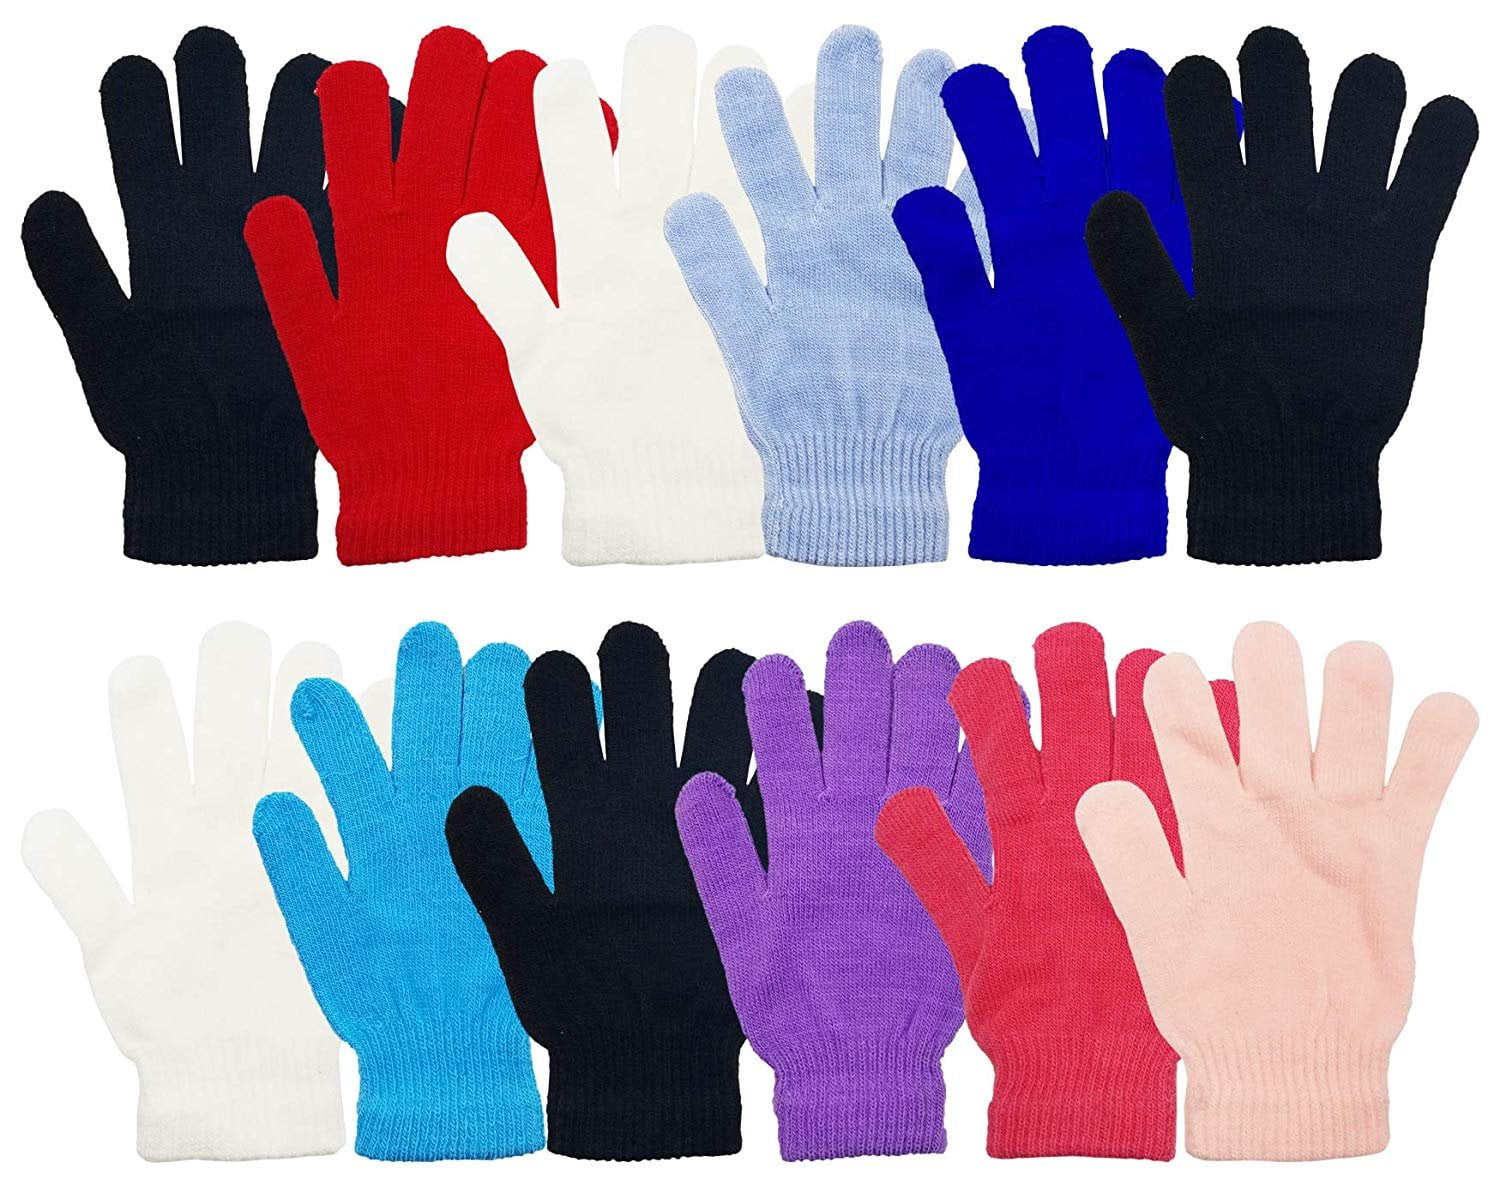 Cooraby 6 Pairs Kids Knitted Magic Gloves Teens Warm Winter Stretchy Full Fingers Gloves 